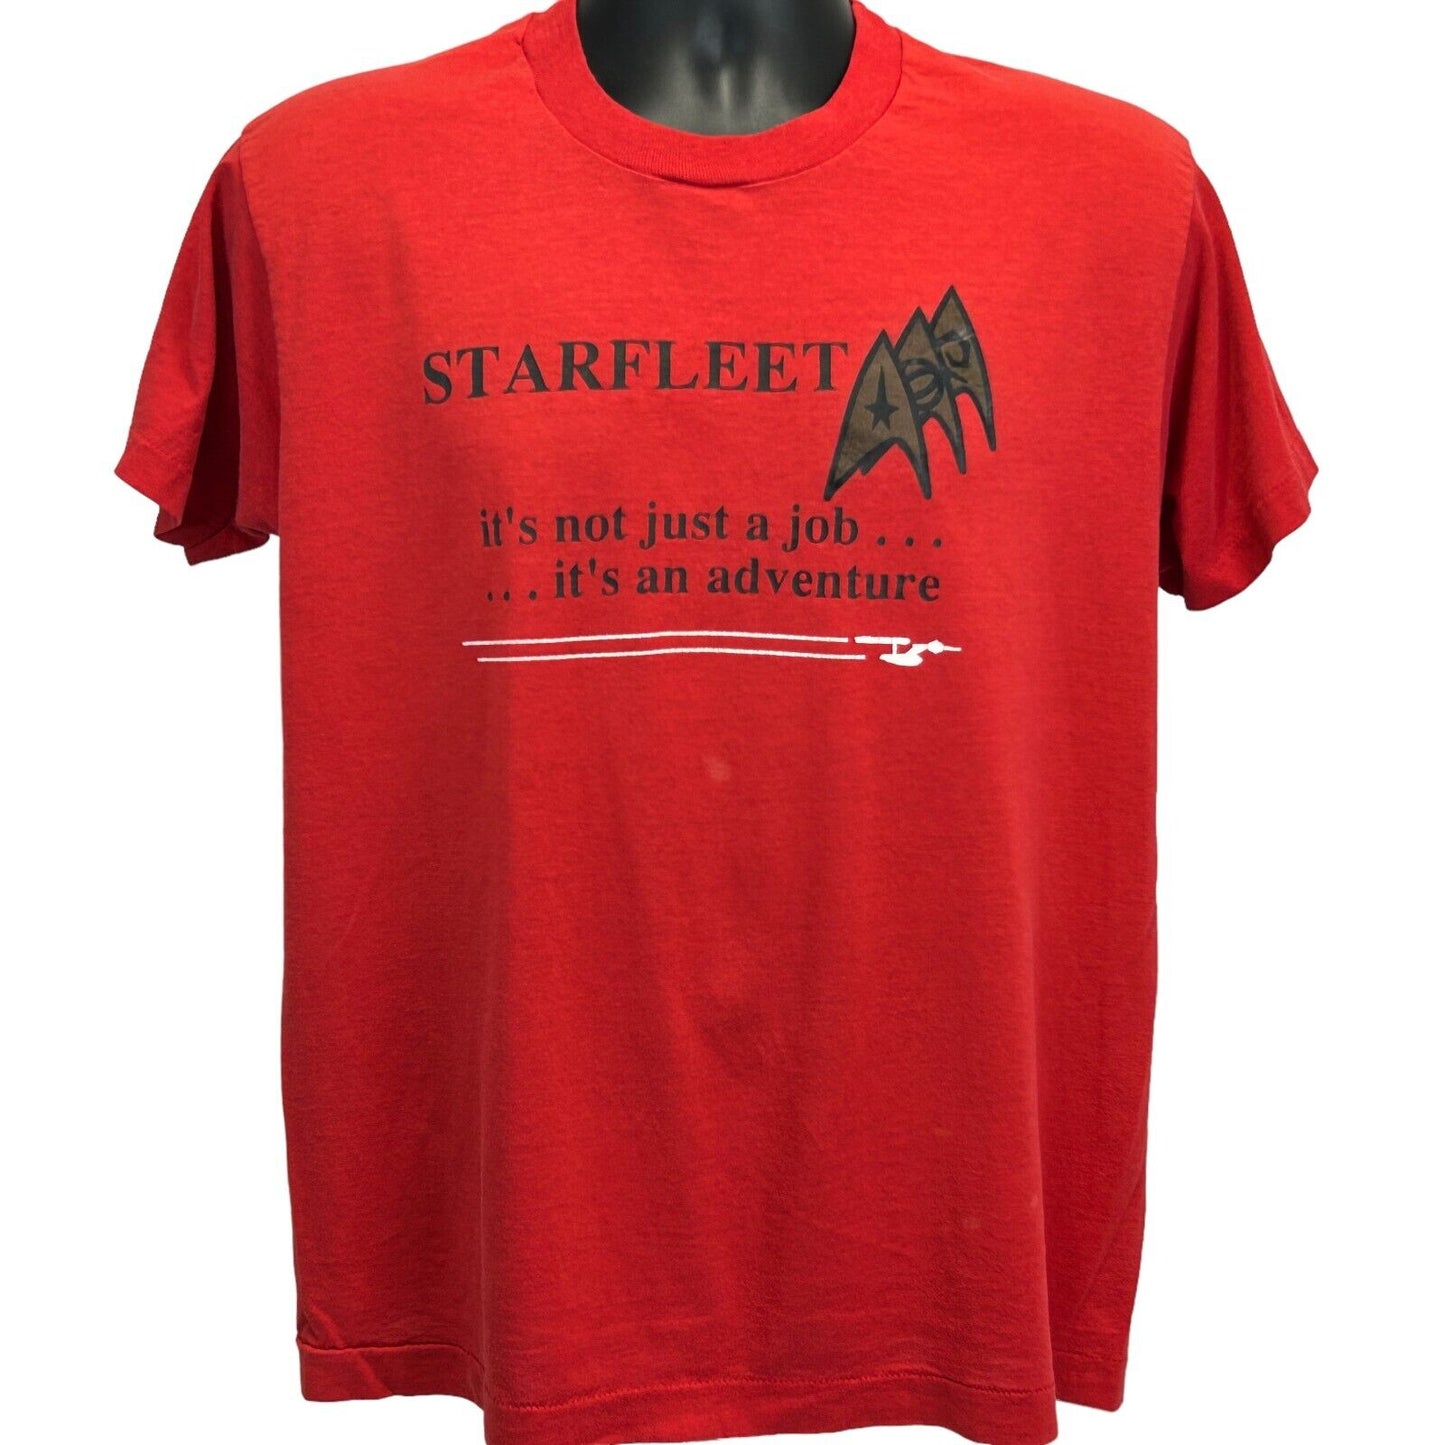 Star Trek Starfleet Vintage 80s T Shirt Large TV Television Show Red Made In USA